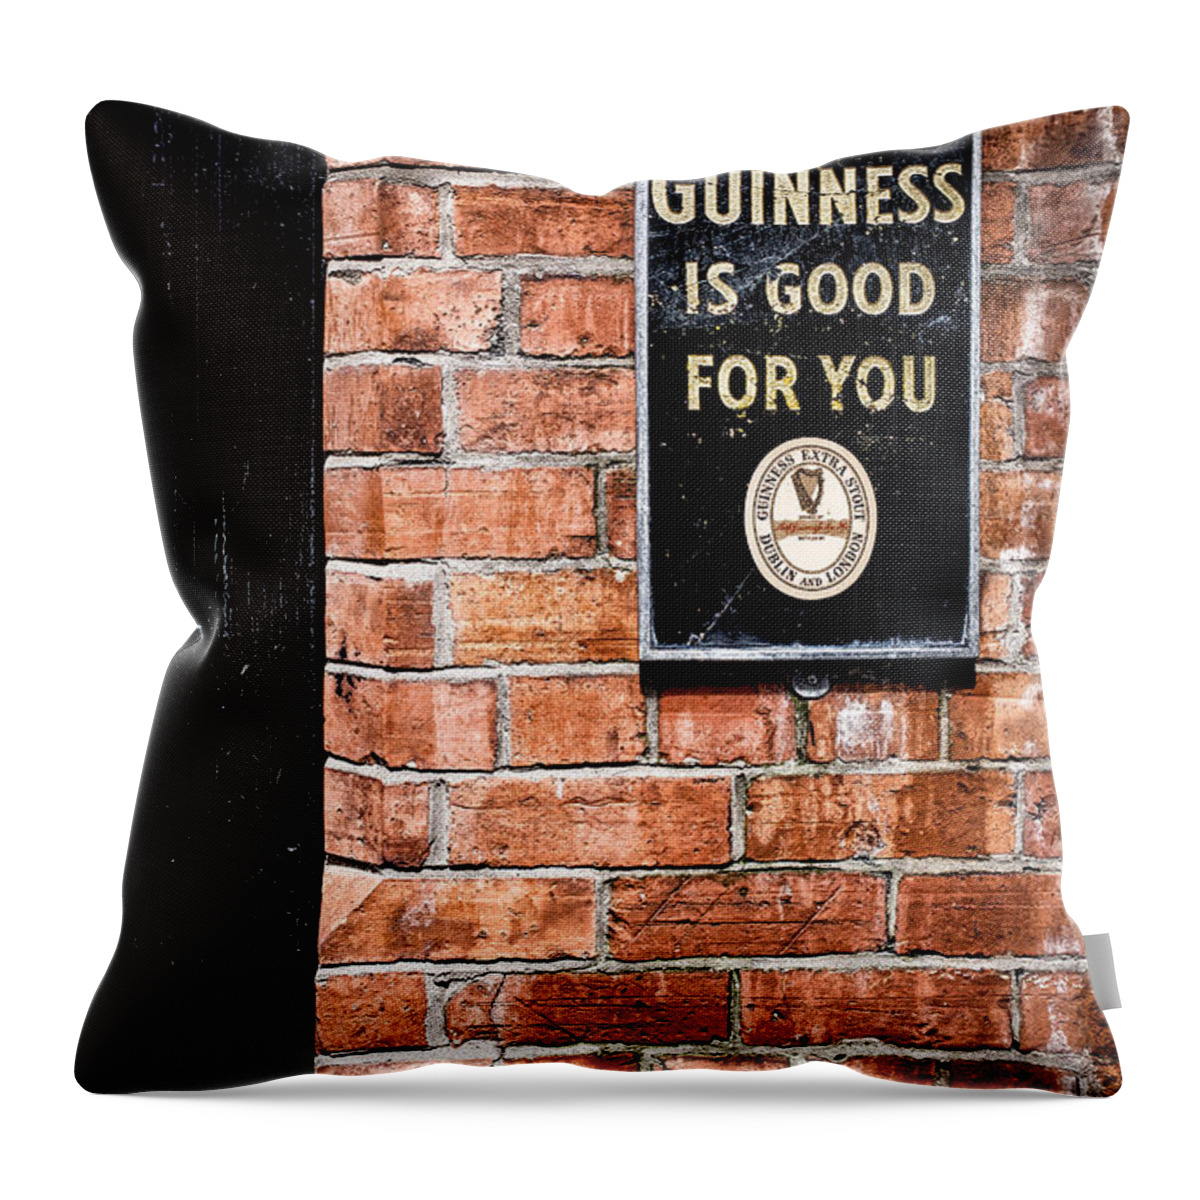 Guinness Throw Pillow featuring the photograph Guinness is good for you by Nigel R Bell